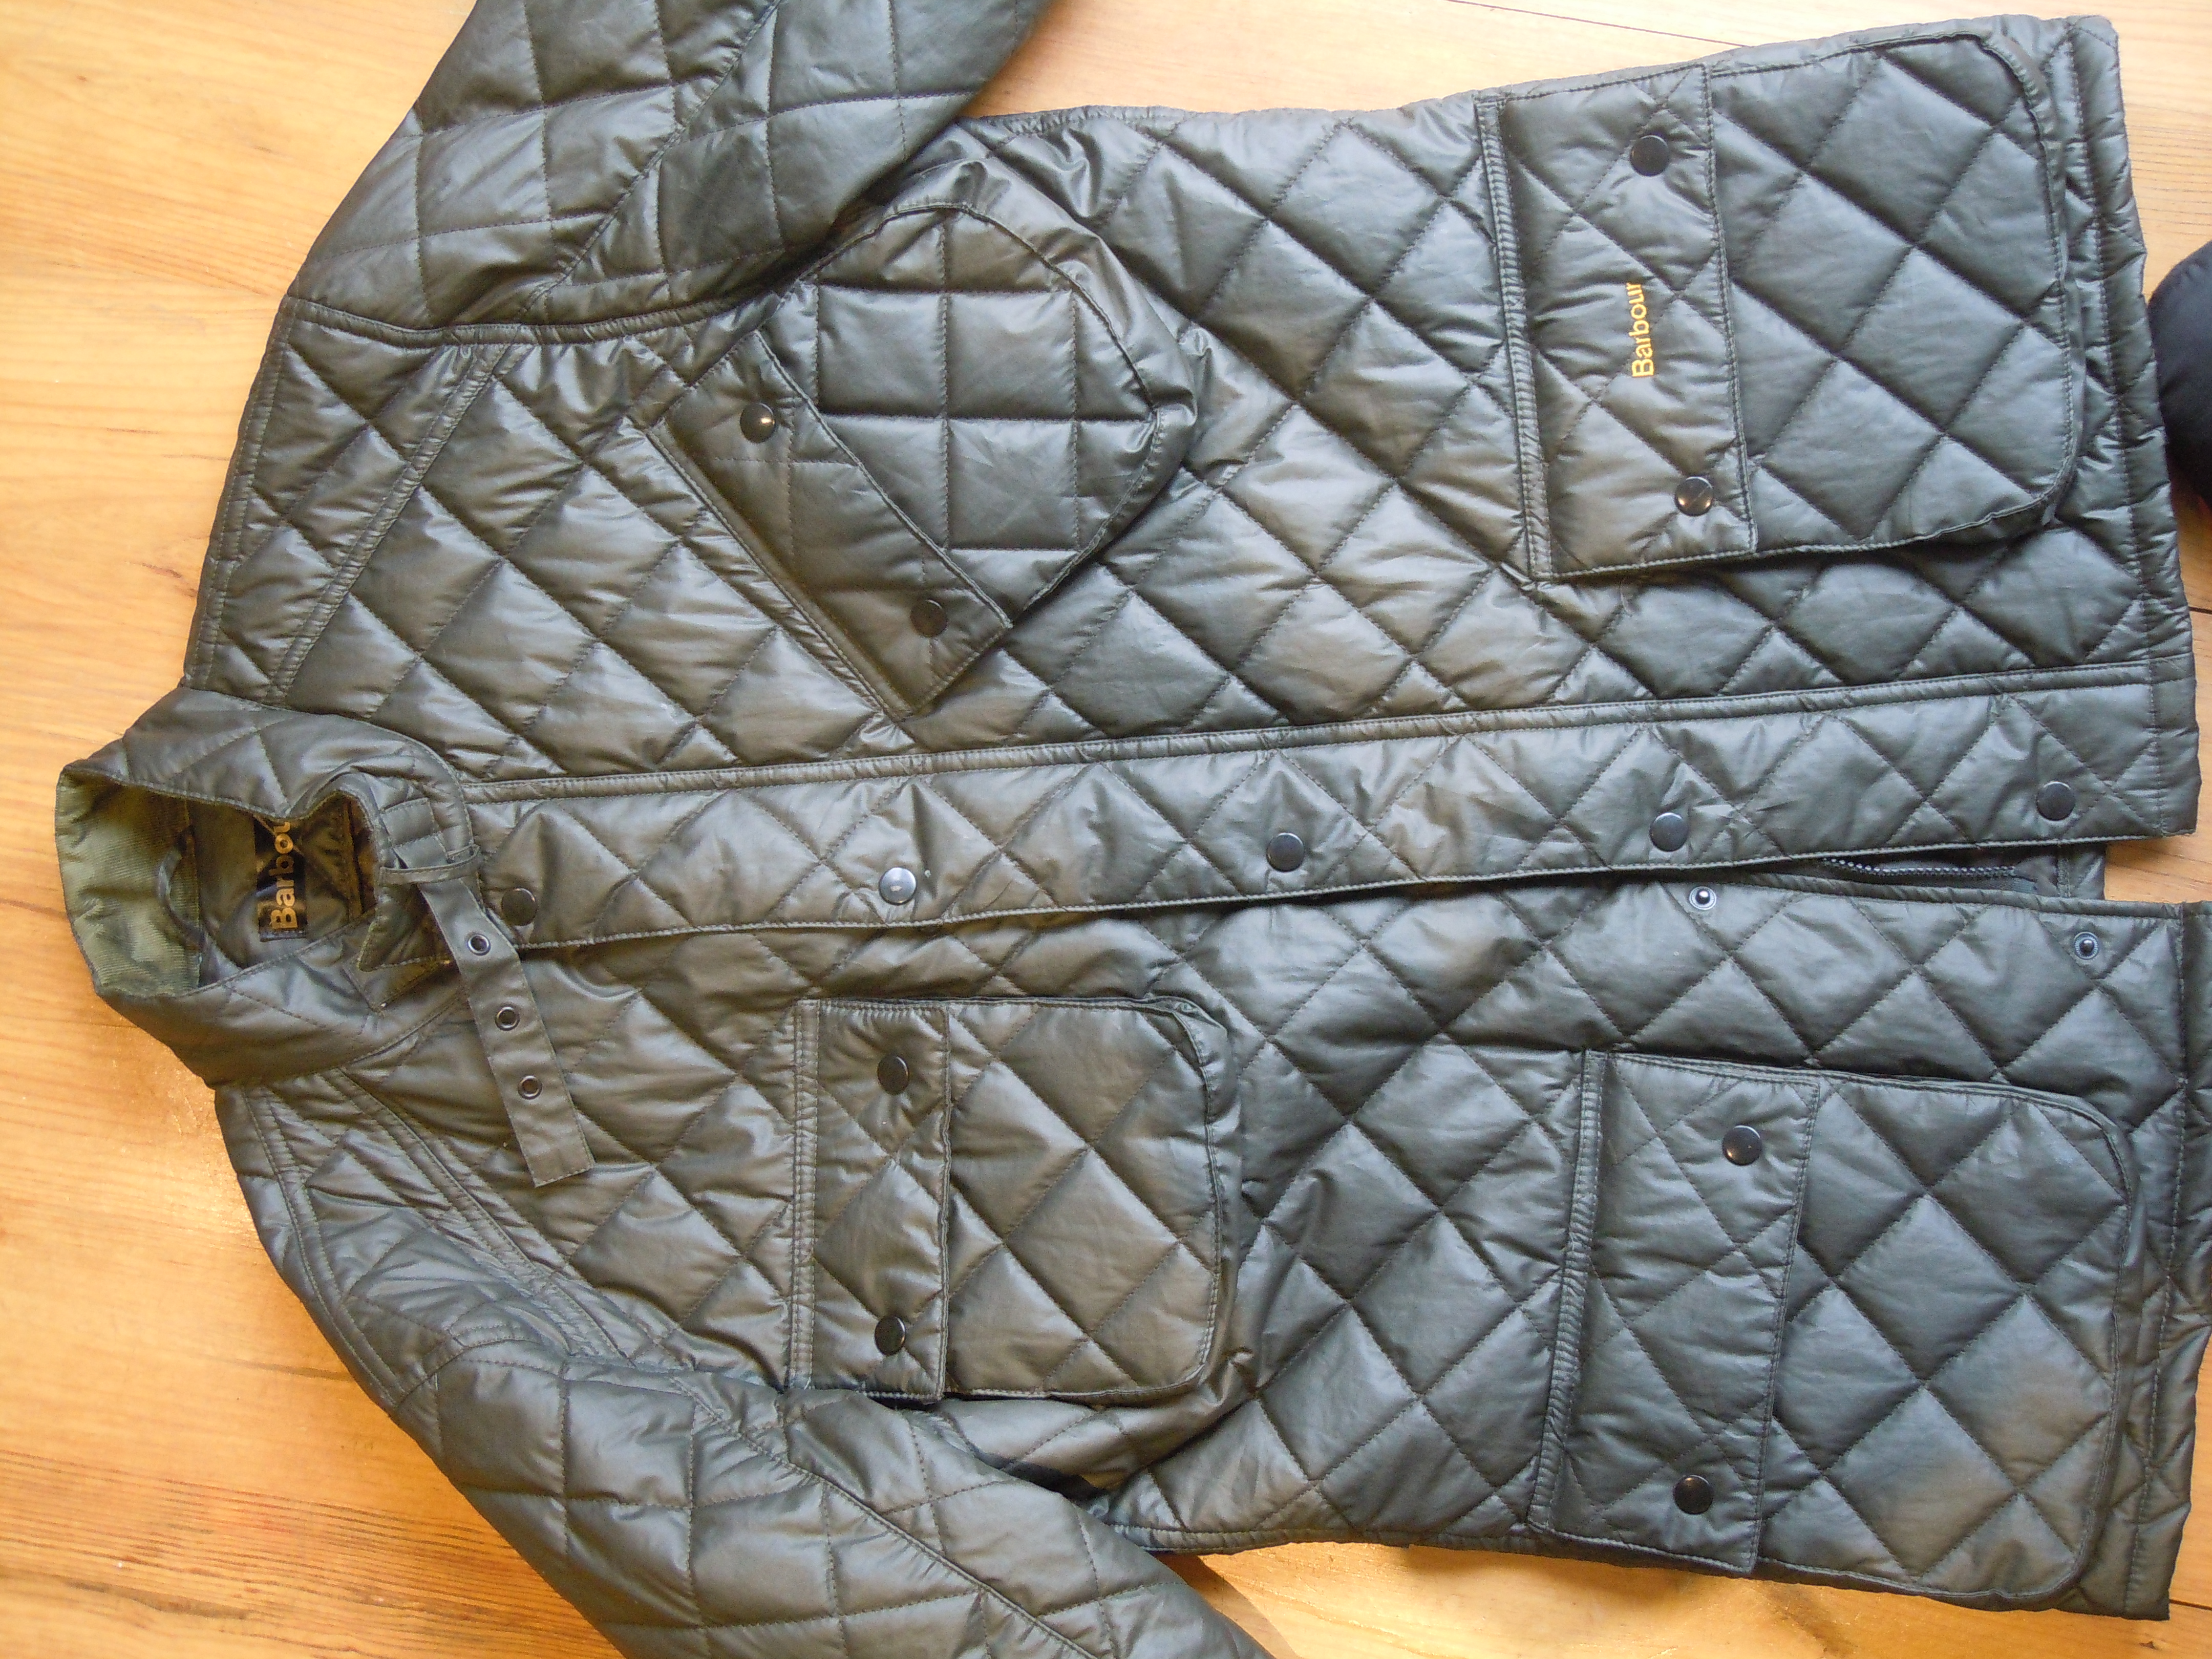 FAKE BARBOUR OR JUST OLD? PLEASE HELP!! | Styleforum